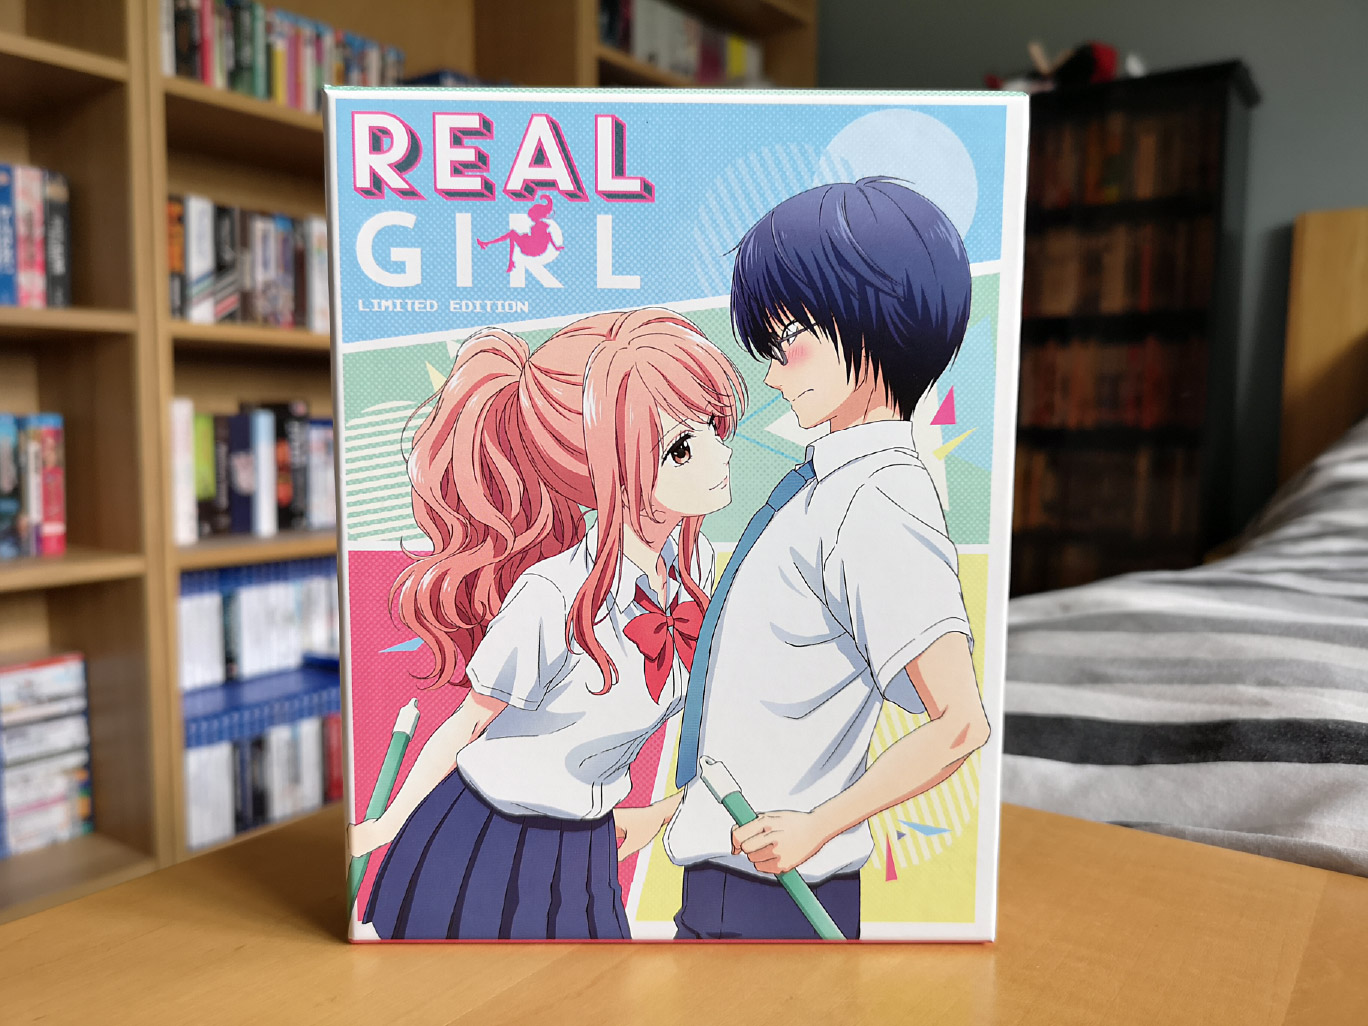 Real Girl (Collector's Edition Blu-ray) Unboxing – The Normanic Vault